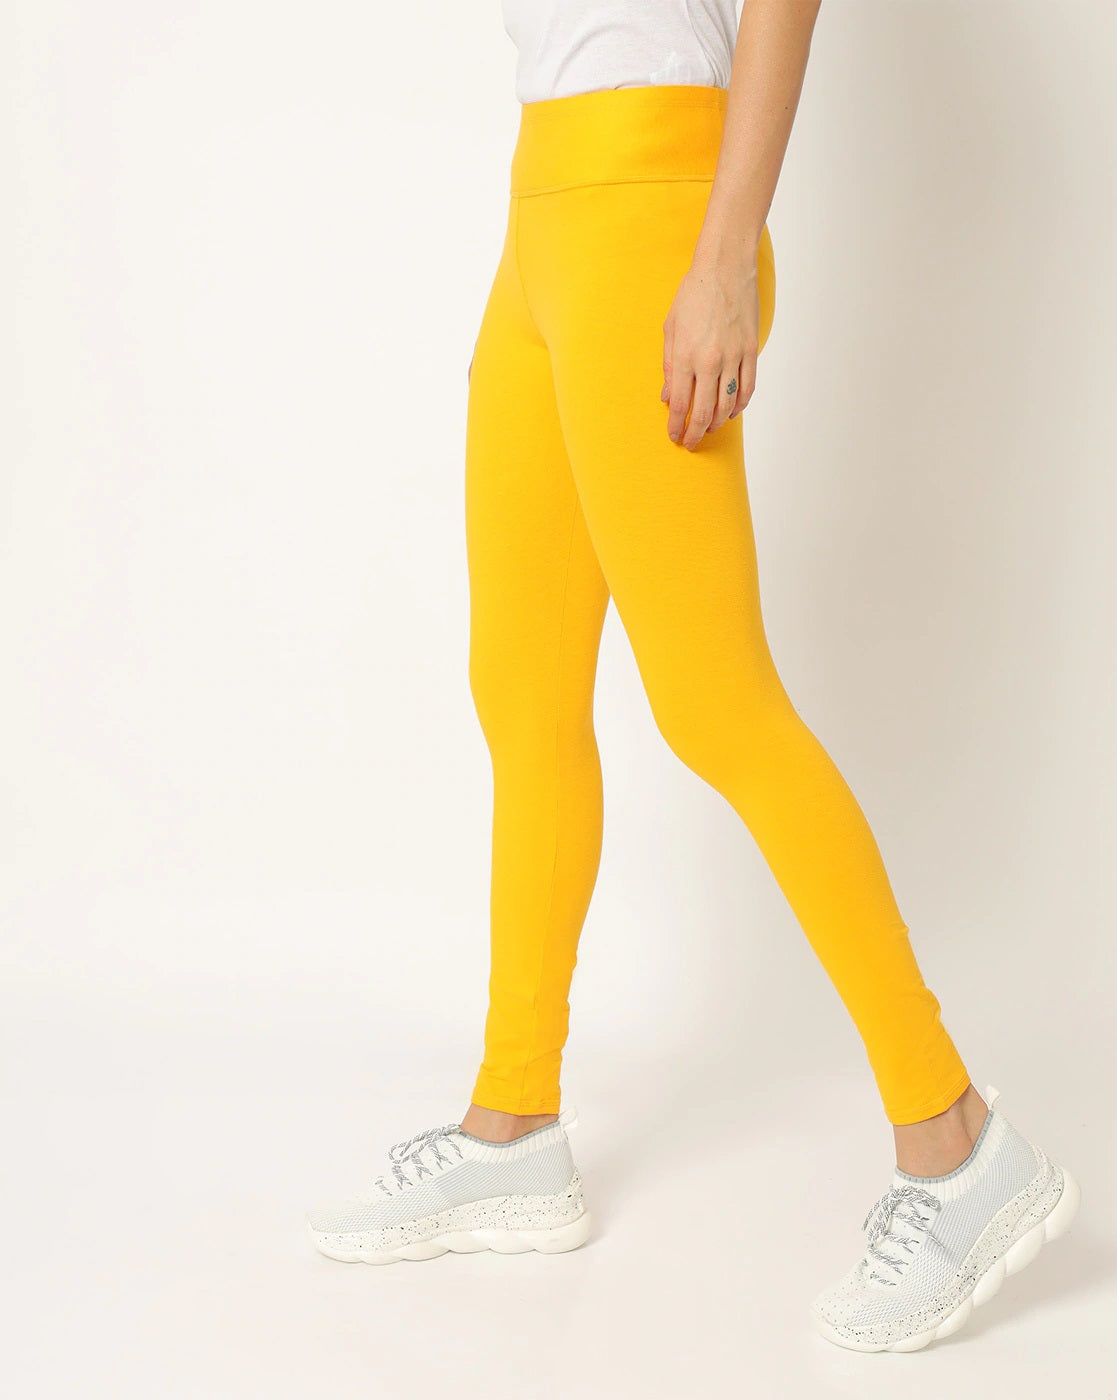 Zyia Active Neon Yellow Parallel Luxe Leggings NWT Size 8-10 